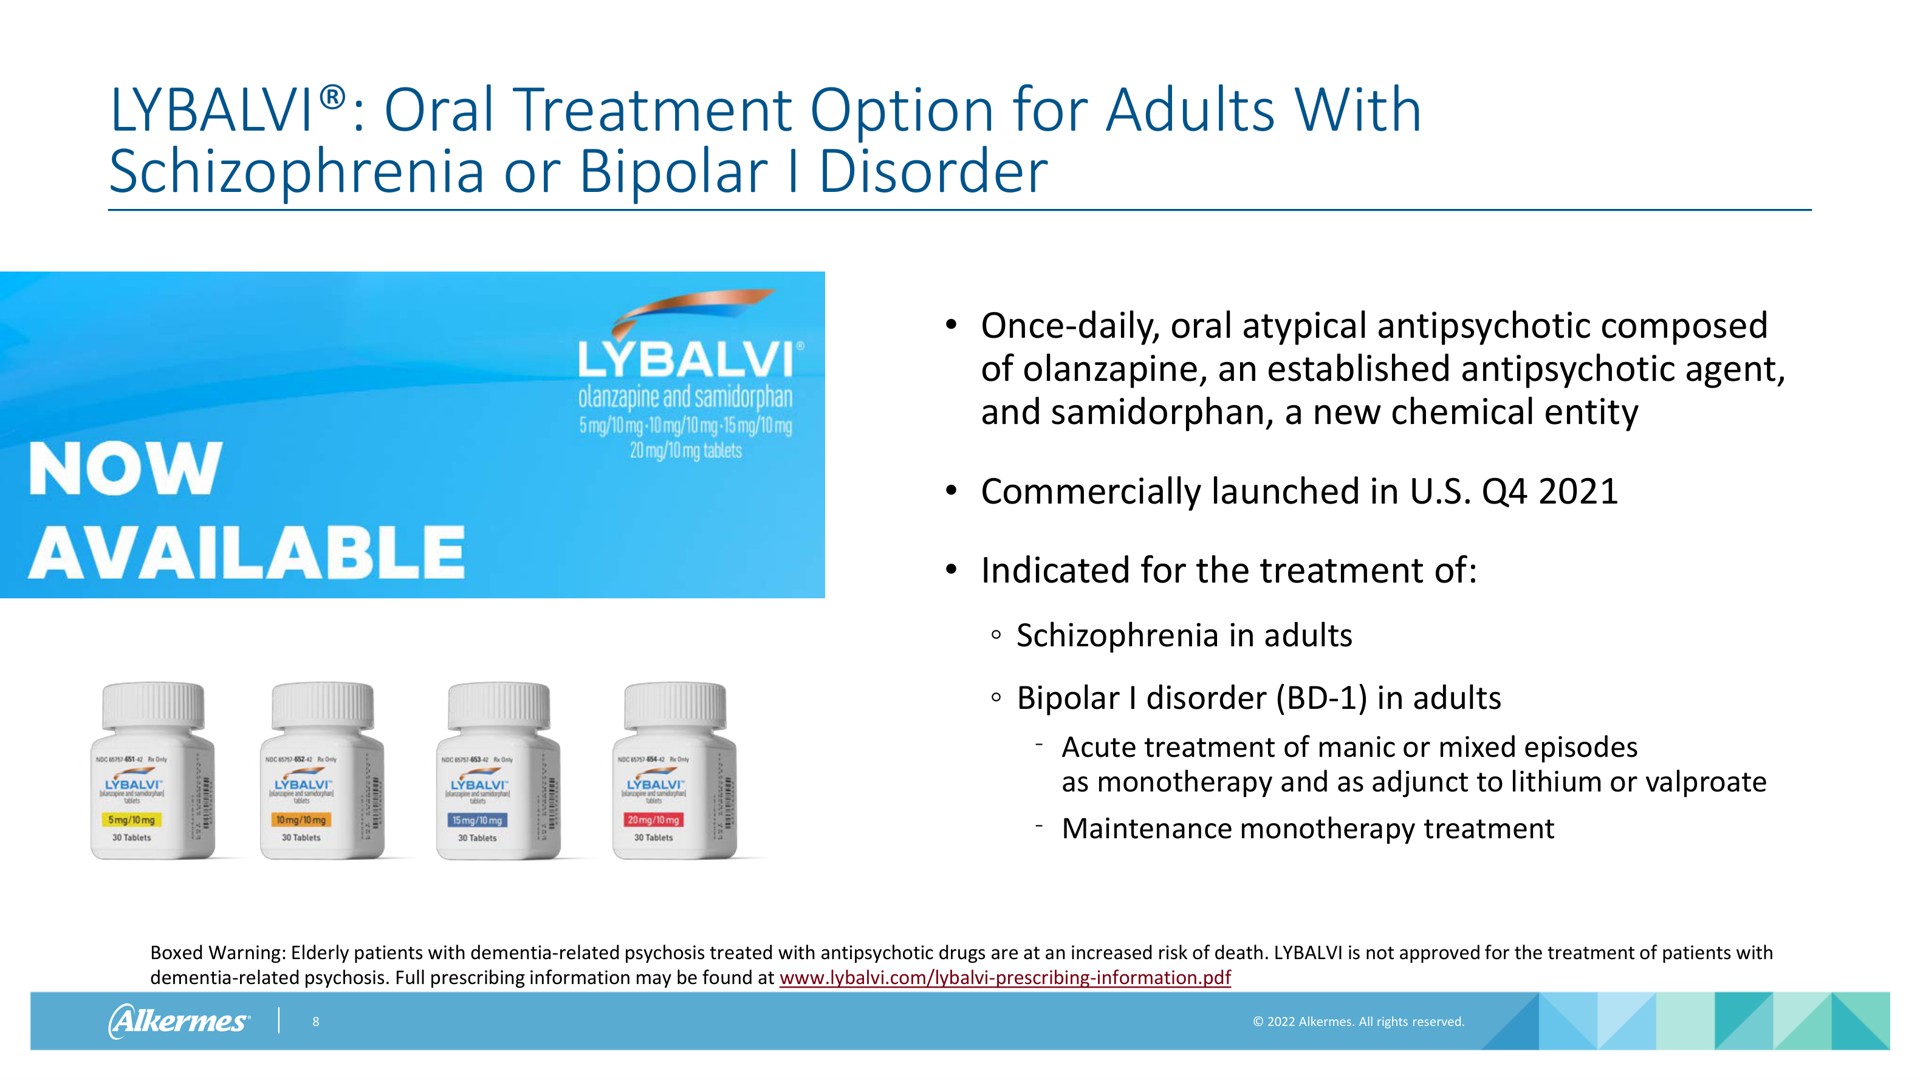 oral treatment option for adults with schizophrenia or bipolar i disorder available | Alkermes